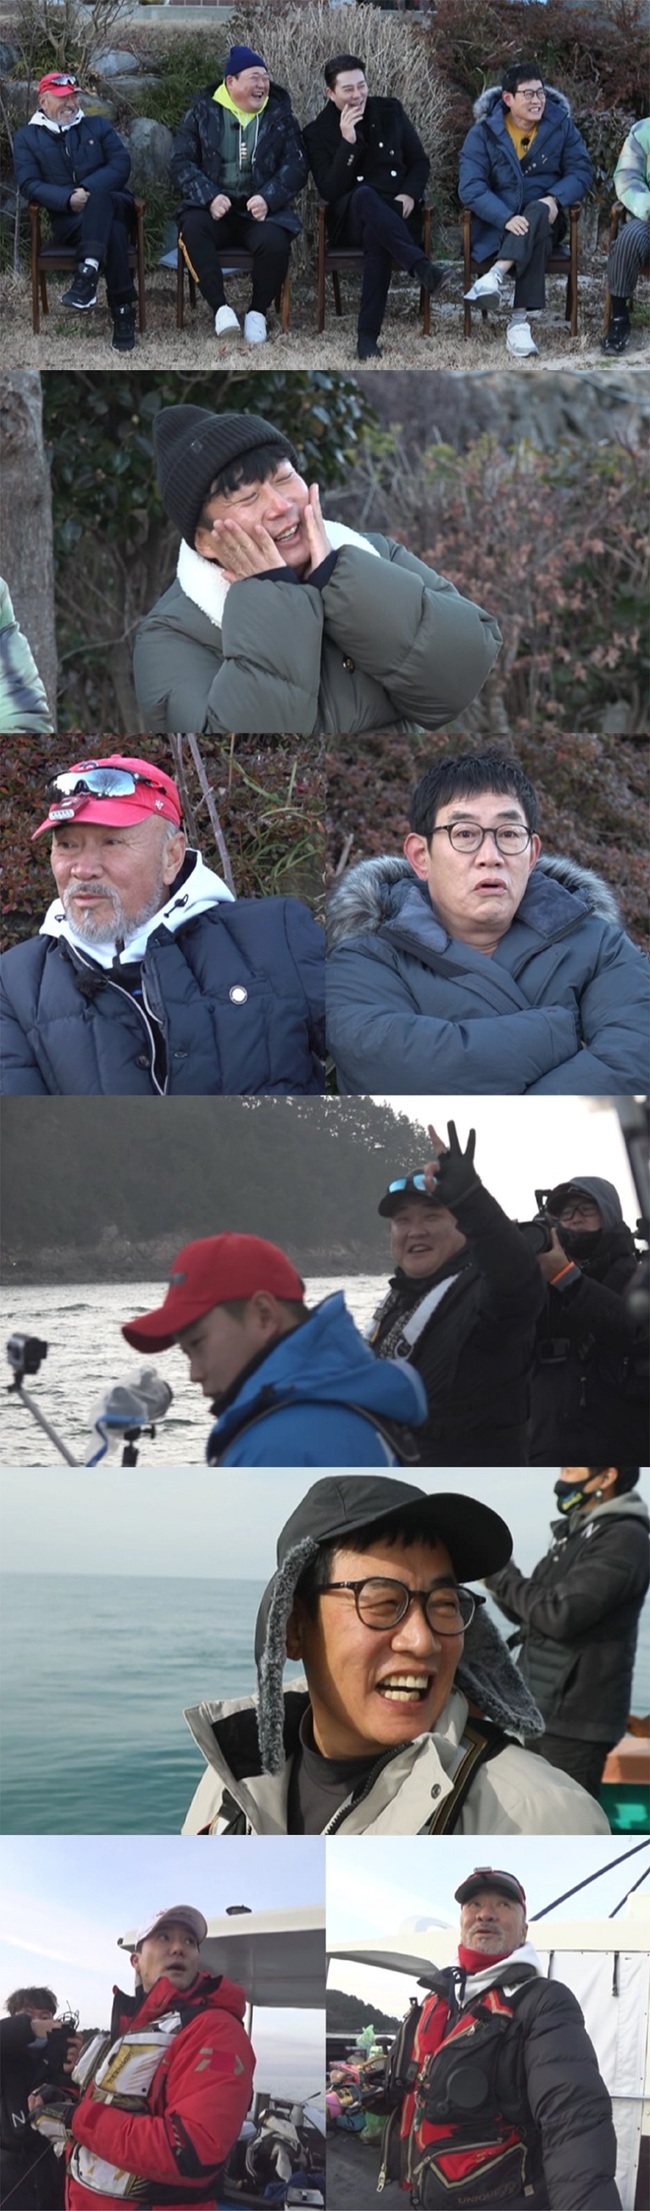 City fishermen play Manito Game.In the 56th episode of Channel A entertainment program, City Fishery 2 (hereinafter referred to as City Fishery 2), which will be broadcast on January 14, Lee Dong-gook will be a guest, and a fishing showdown will be held in Yeosu, South Jeolla Province, following Goheung, South Jeolla Province.For the first time in the New Year, the Manito Game will be held for the first time as a City Fisherman. It is designed to take time to rethink the importance of colleagues who have forgotten because of the hot fishing competition every time.However, due to the members who do not understand the rules of Game, they have been unexpectedly sick from the beginning.When the production team gave a kind explanation saying, I do not know him well for the day tomorrow, Lee Duk-hwa, the big brother, asked, How do you do it well?) It is said that he showed a desire to find a wrong number of times and made a laugh.Manito Game, which was Hundun from the beginning, is an increasingly unexpected good deed (?) is said to have been transformed into an exciting Manito Practice Battle, and attention is focused.Manitos first law, which he must practice without knowing, was not yet there, and there was a scene that went beyond imagination, with an oversmile and awkward kindness unfolding, accompanied by an awkward foot performance to hide Manito as well as a navel.So the youngest Kim Jun-hyun said, Please! Manito is not making me feel.I want you to know what it is, he said, complaining of frustration. Lee Tae-gon said, I want to catch one and do it well. 